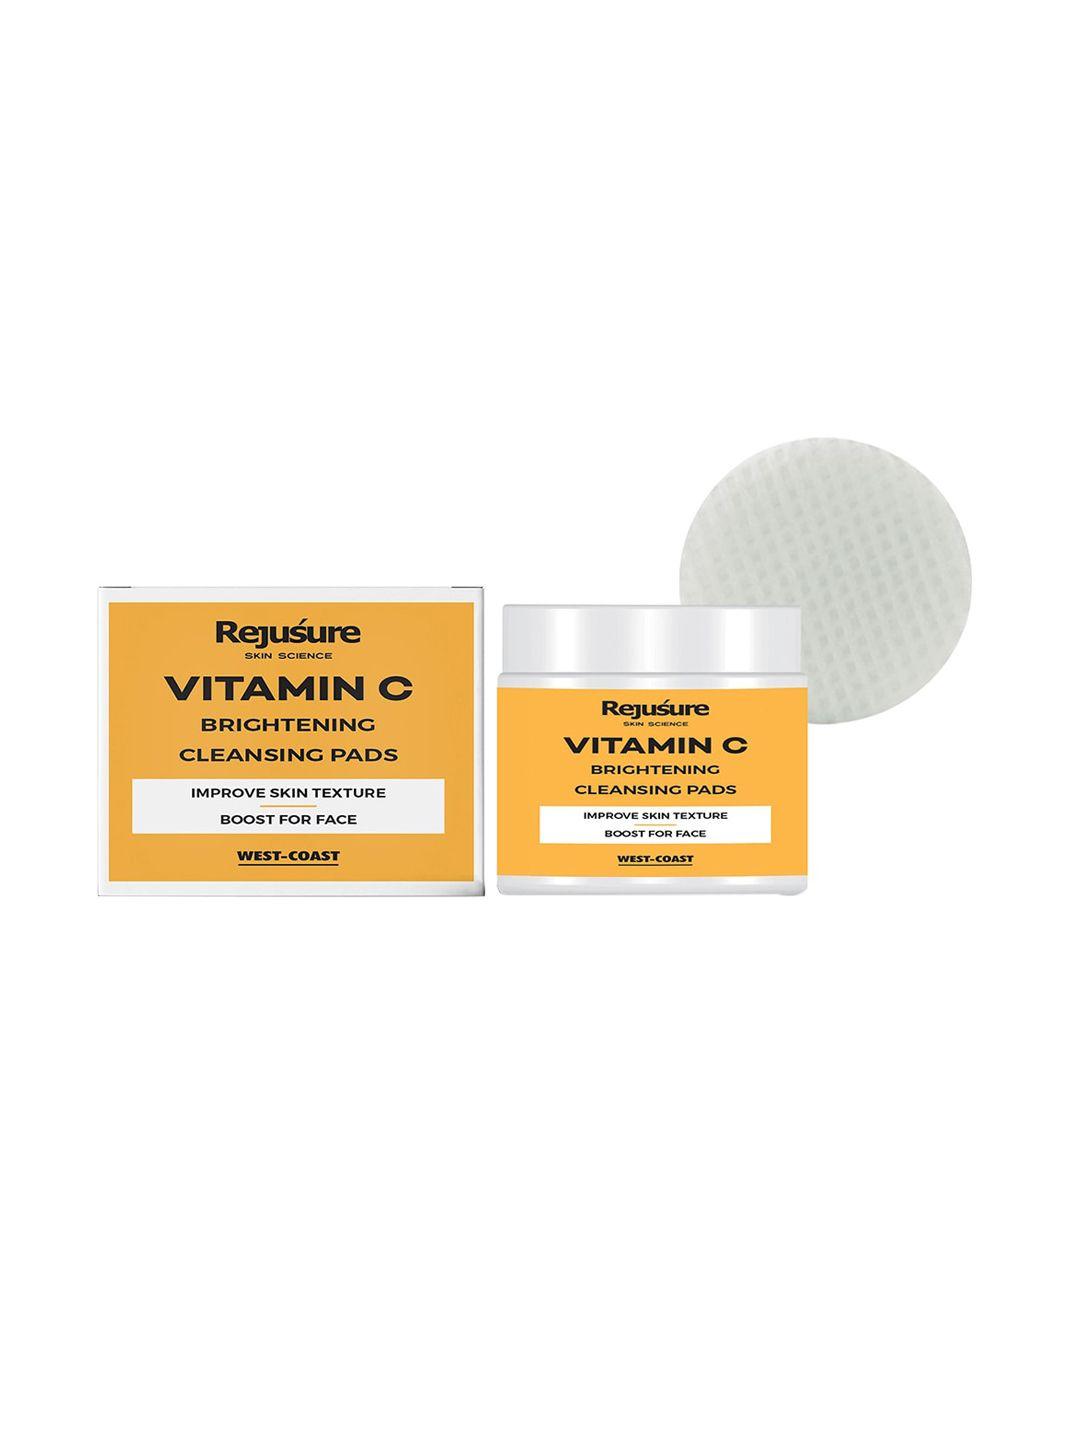 rejusure-vitamin-c-brightening-cleansing-pads-to-improve-skin-texture---50-pads